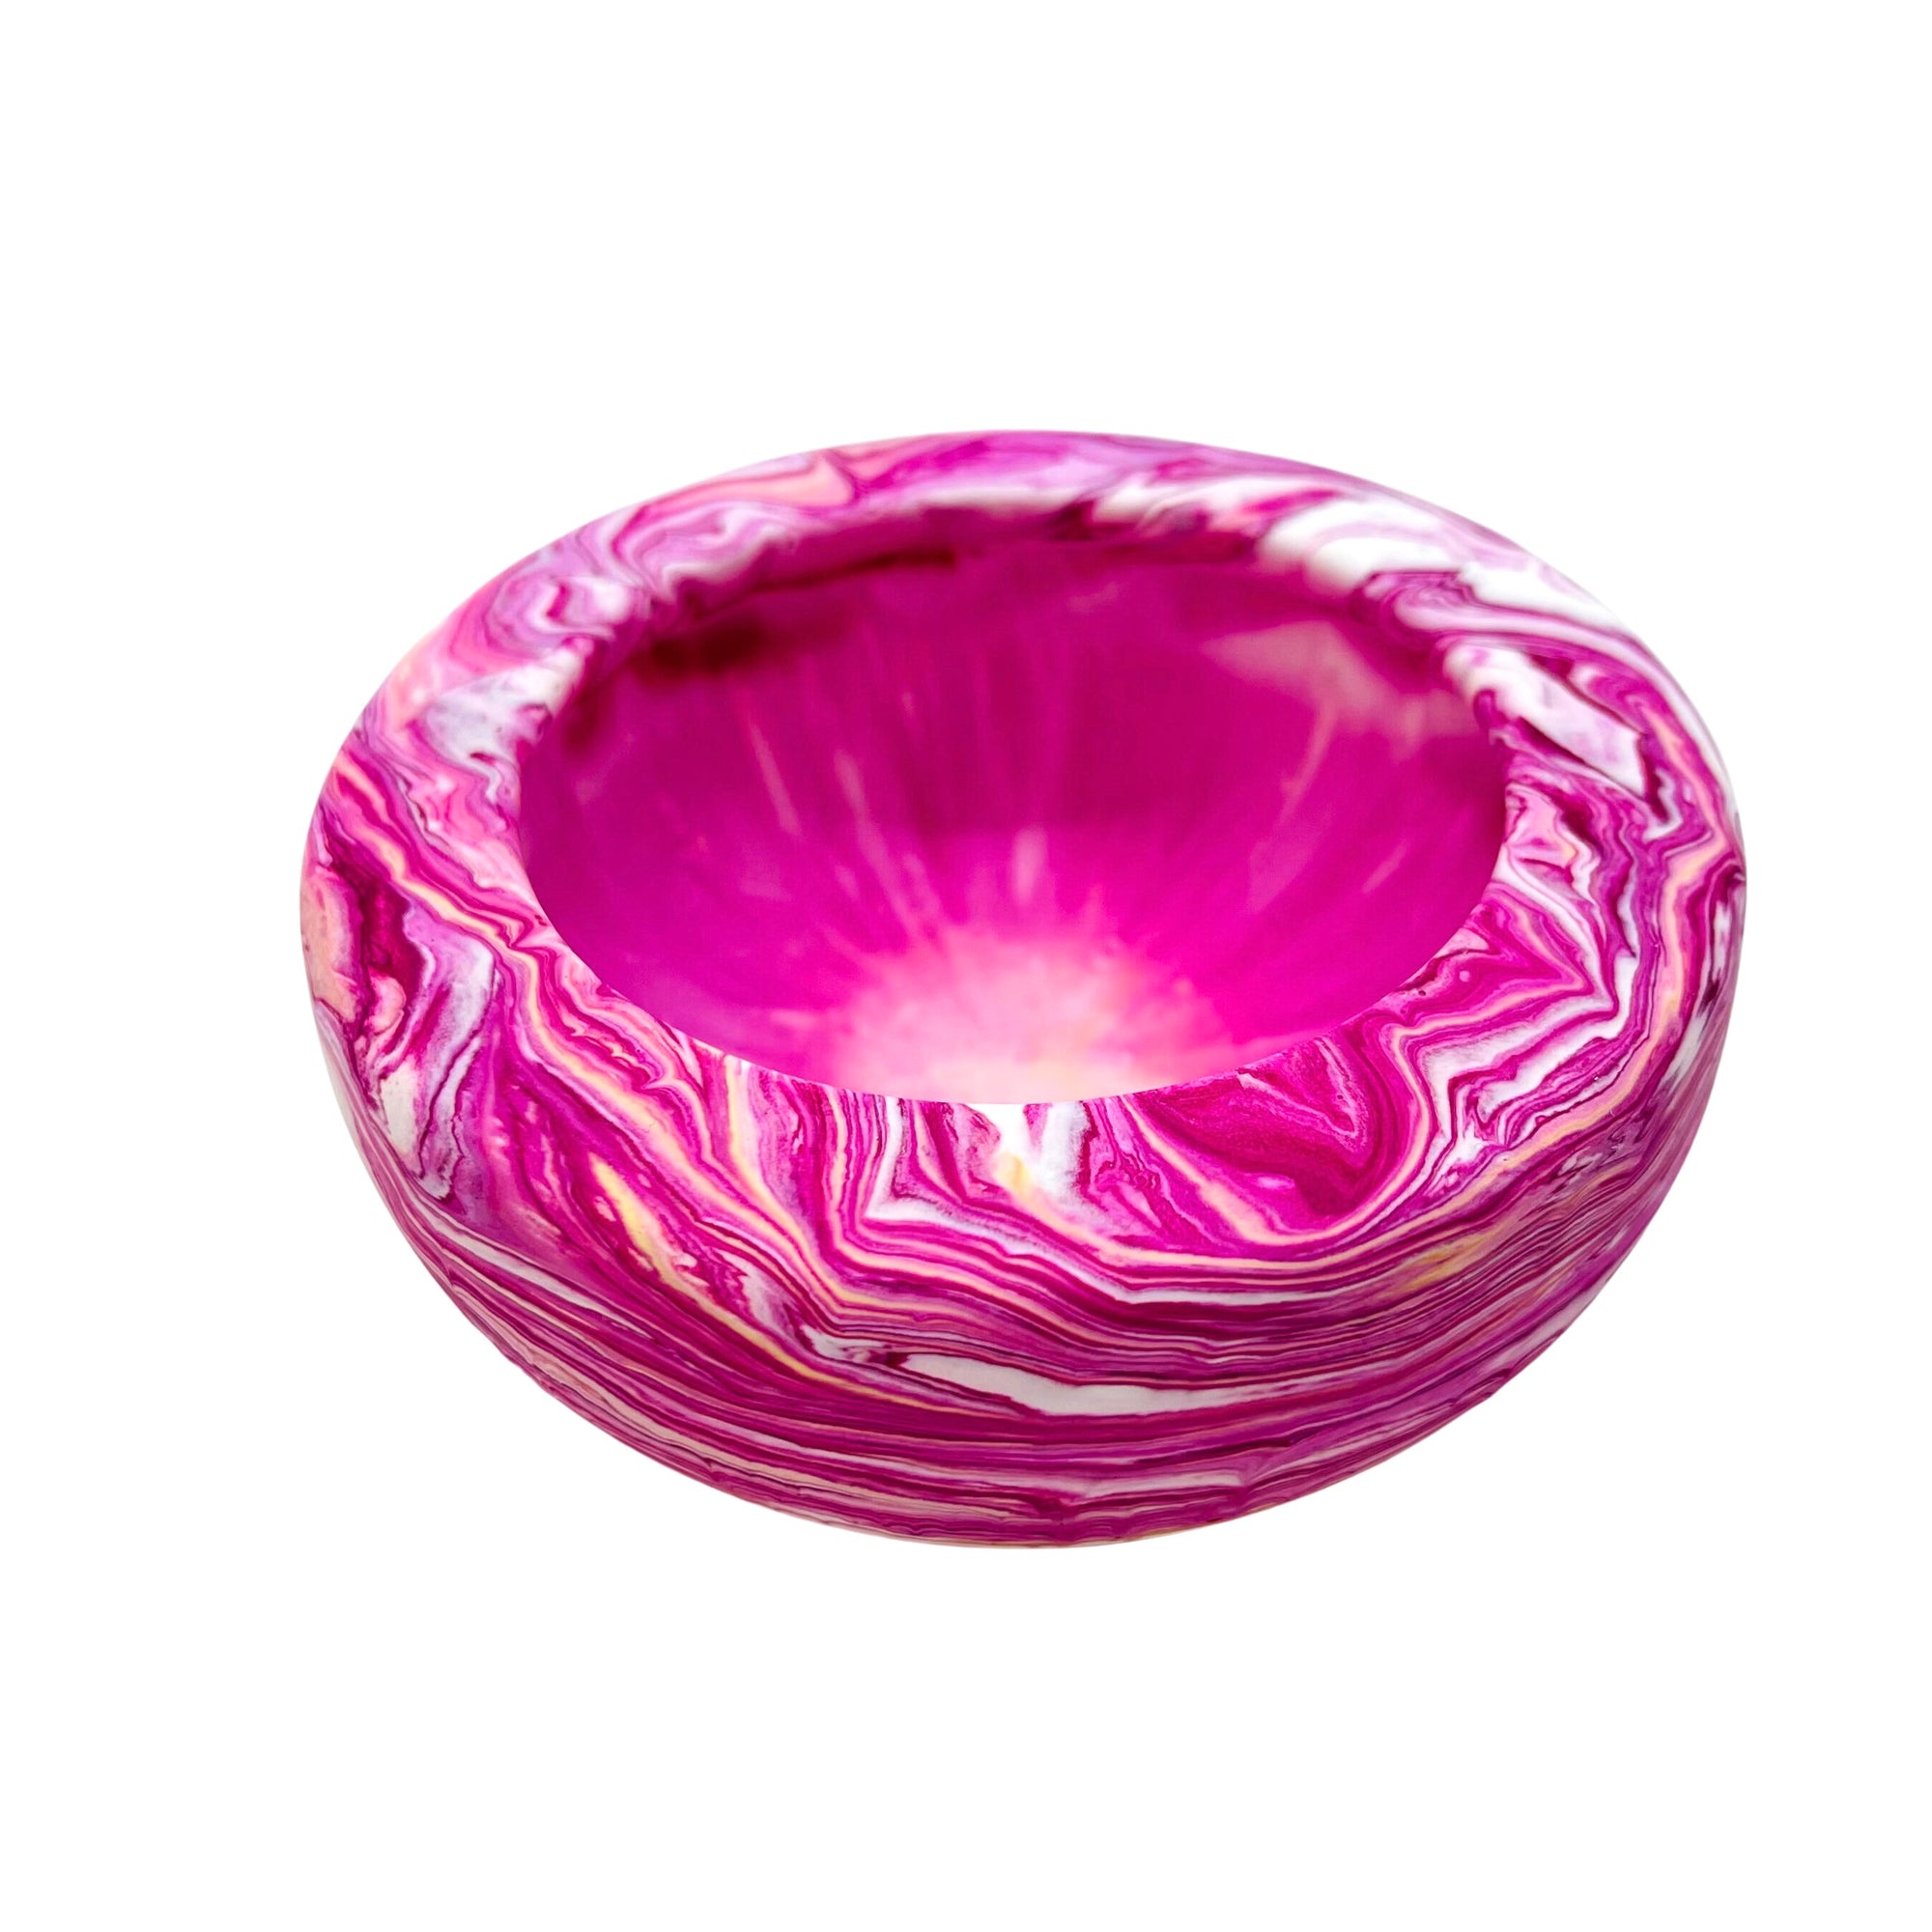 This small round jesmonite bowl measuring 10cm in diameter is marbled with magenta pigment.